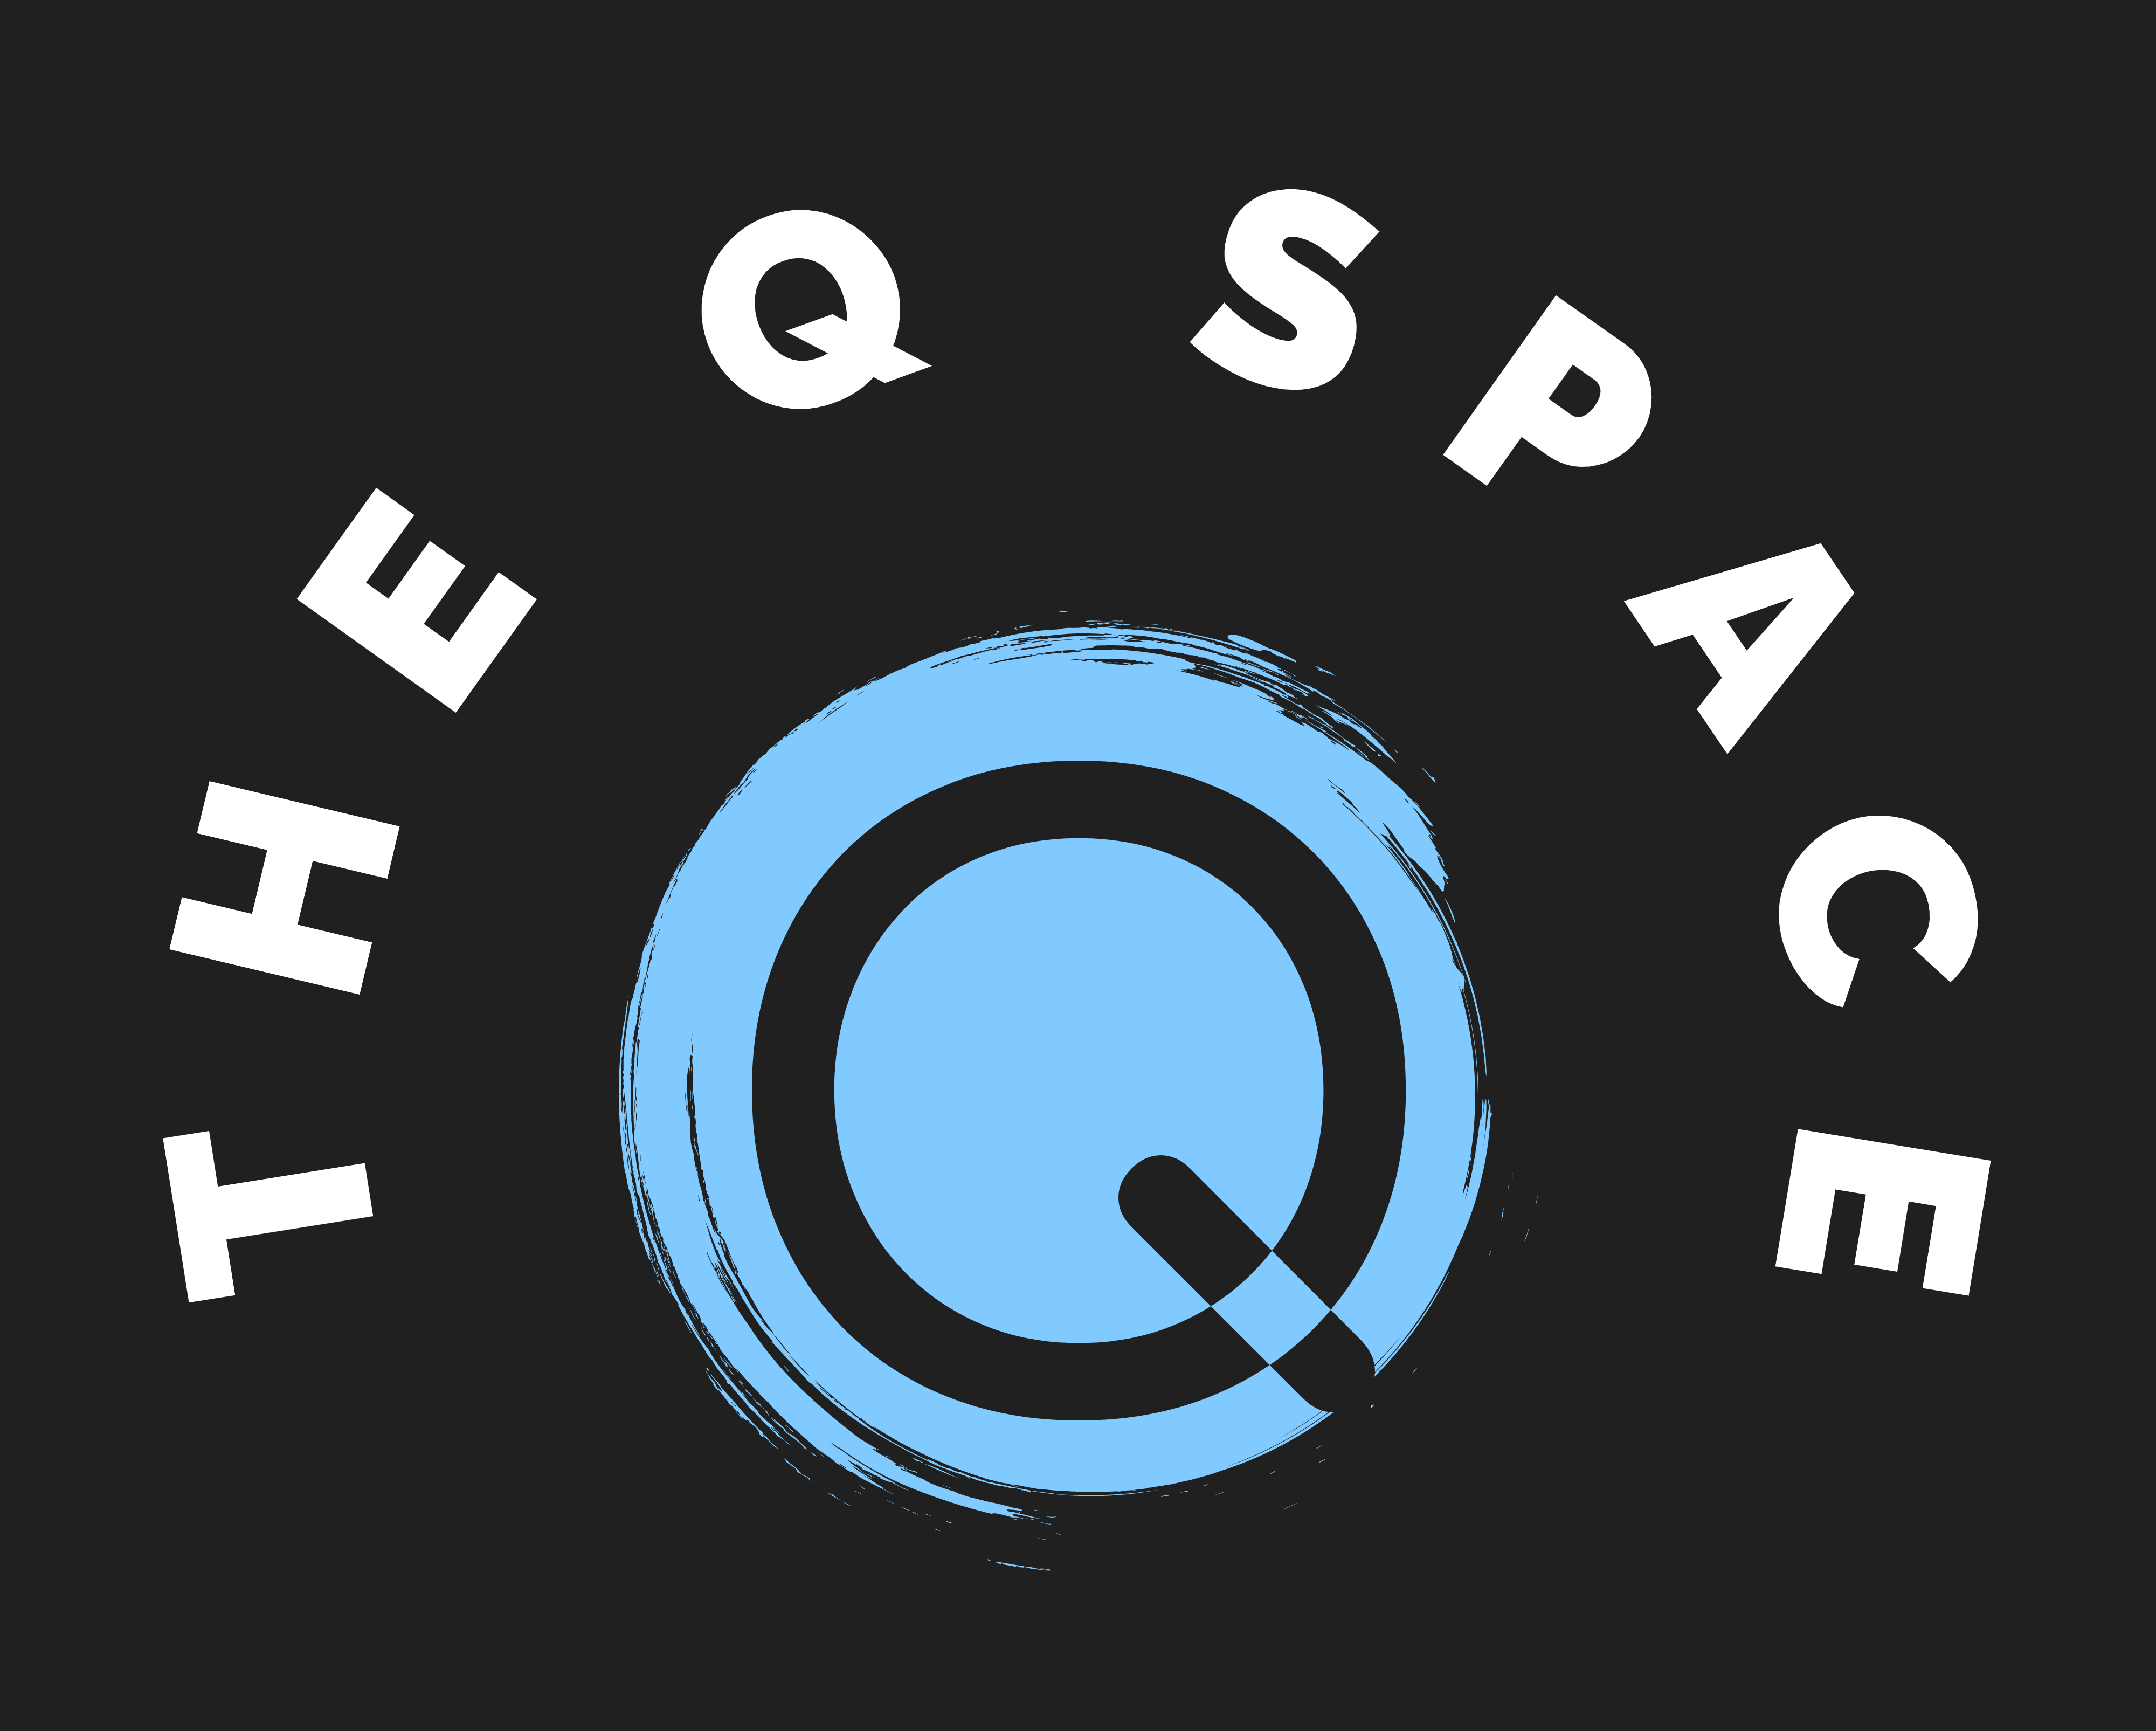 The Q space